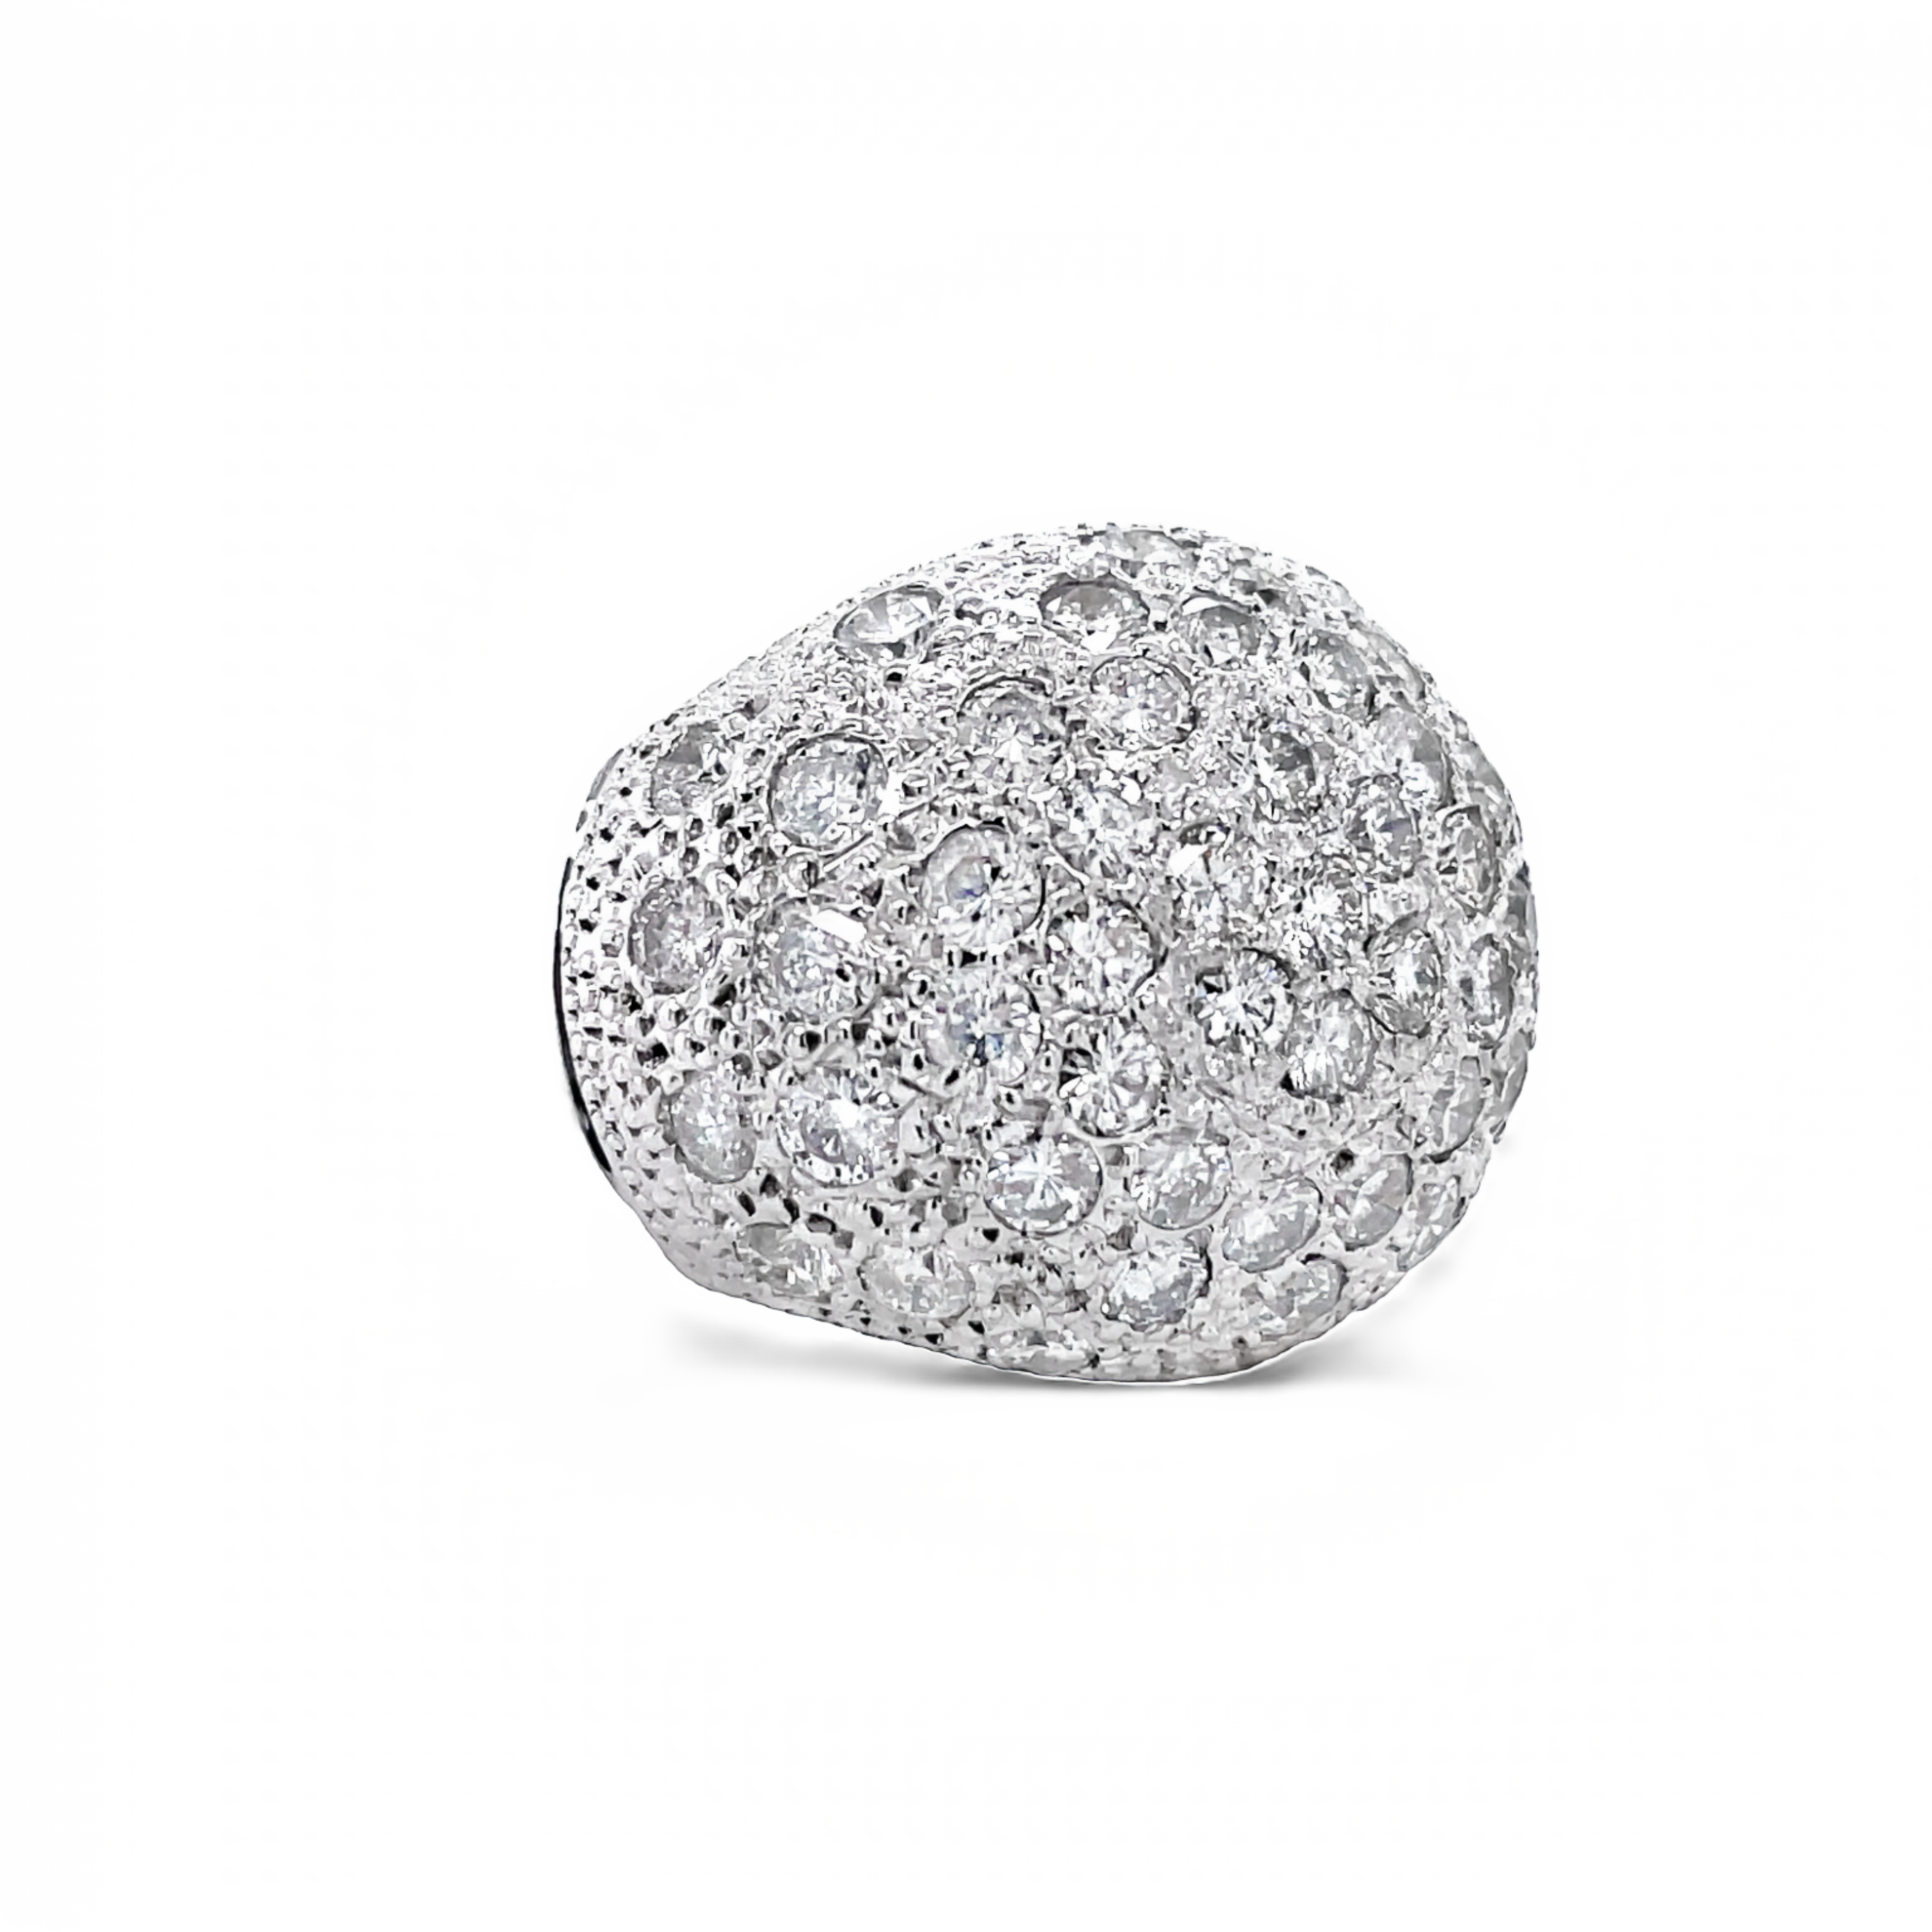 Luxuriate in 18.00 mm of 14k white gold in a classic gallery finish, with round diamonds adorning the thick shank! This pave dome ring is sure to dazzle!